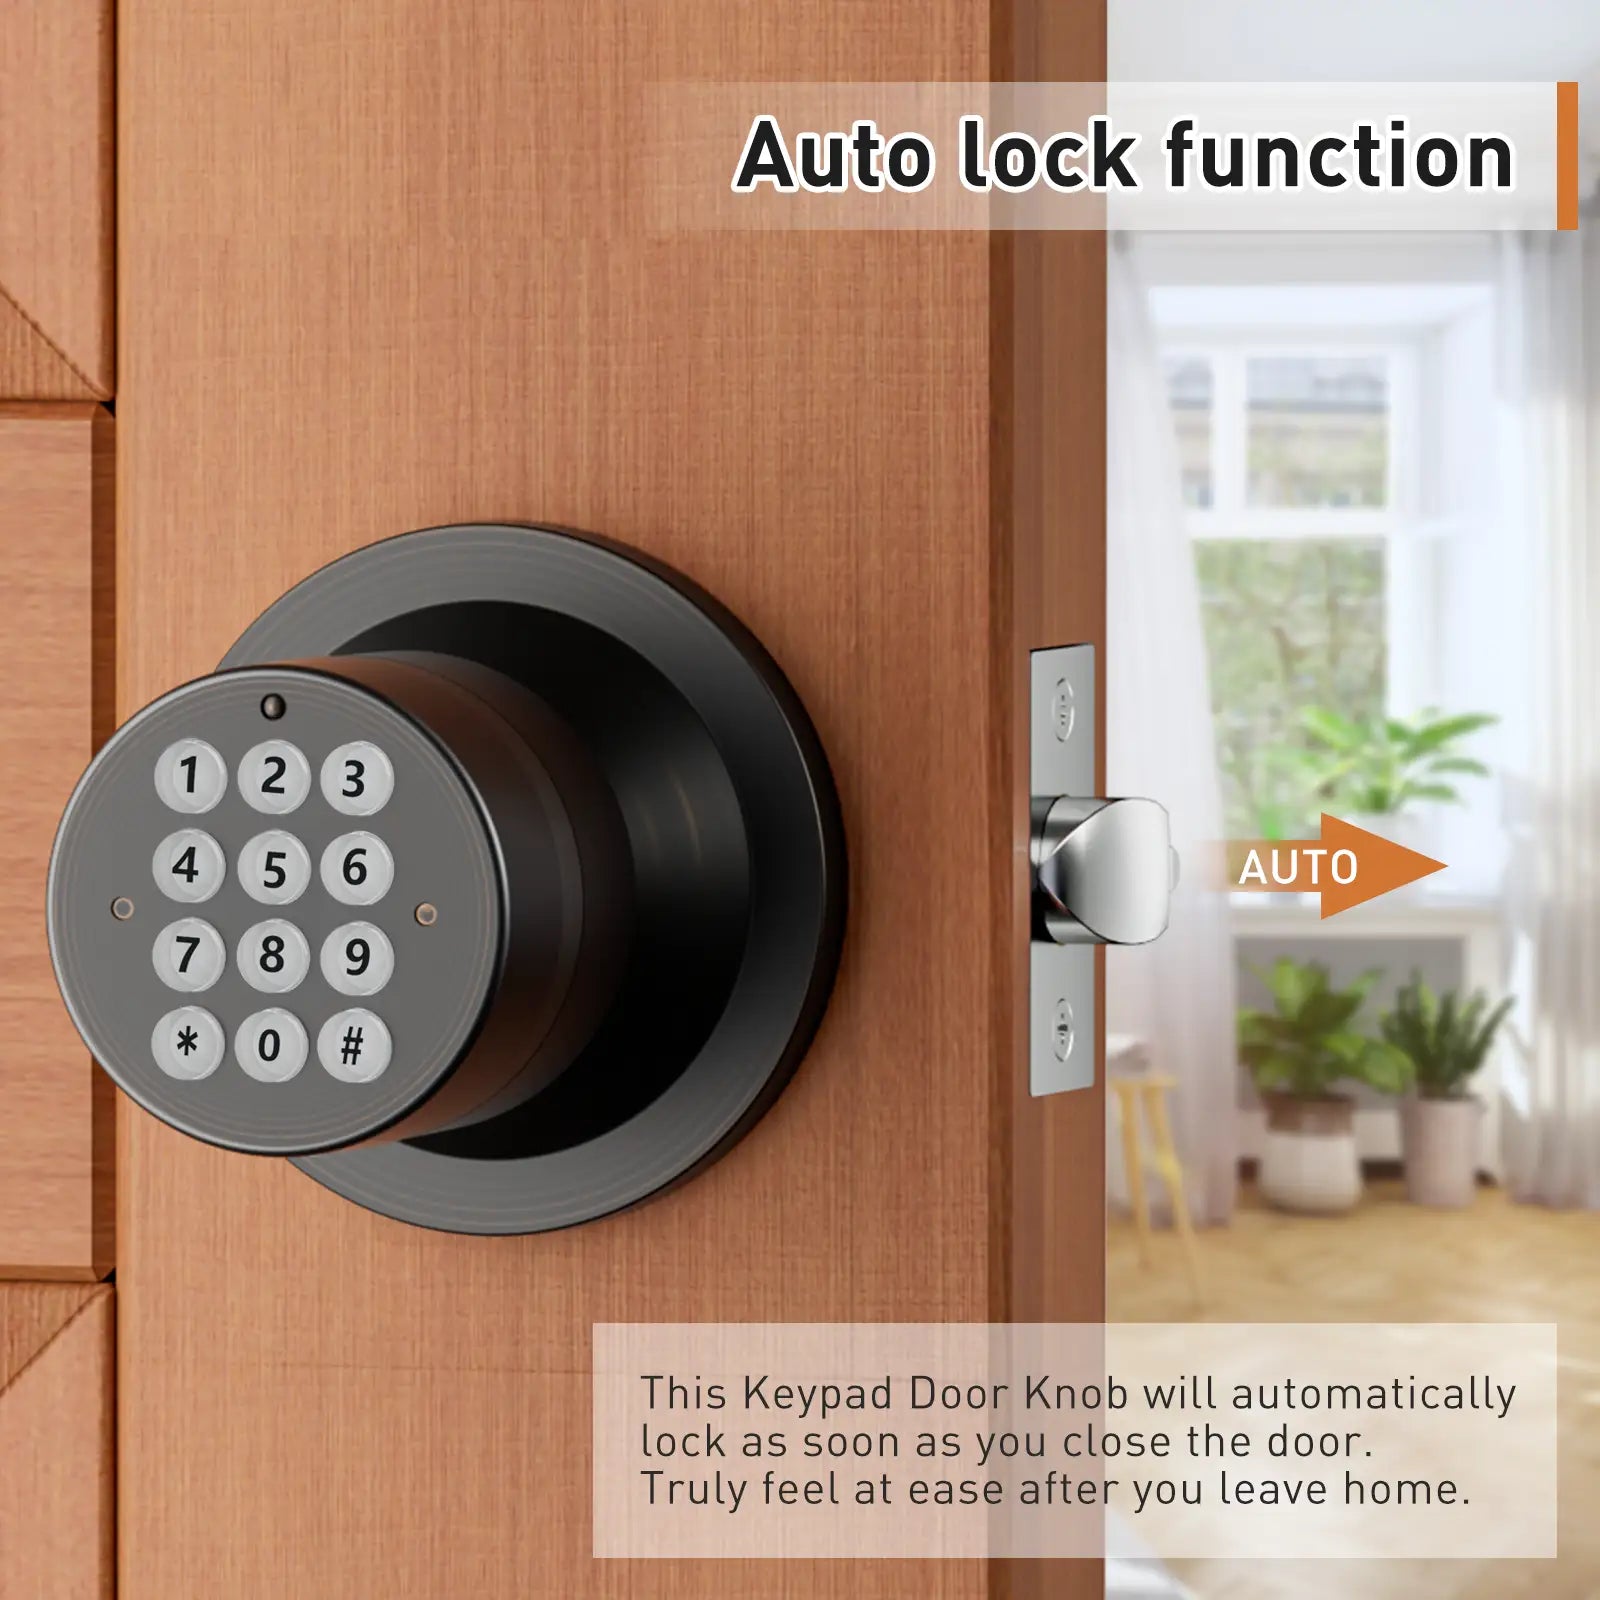 Keyless Entry Door Locks: Everything You Need to Know